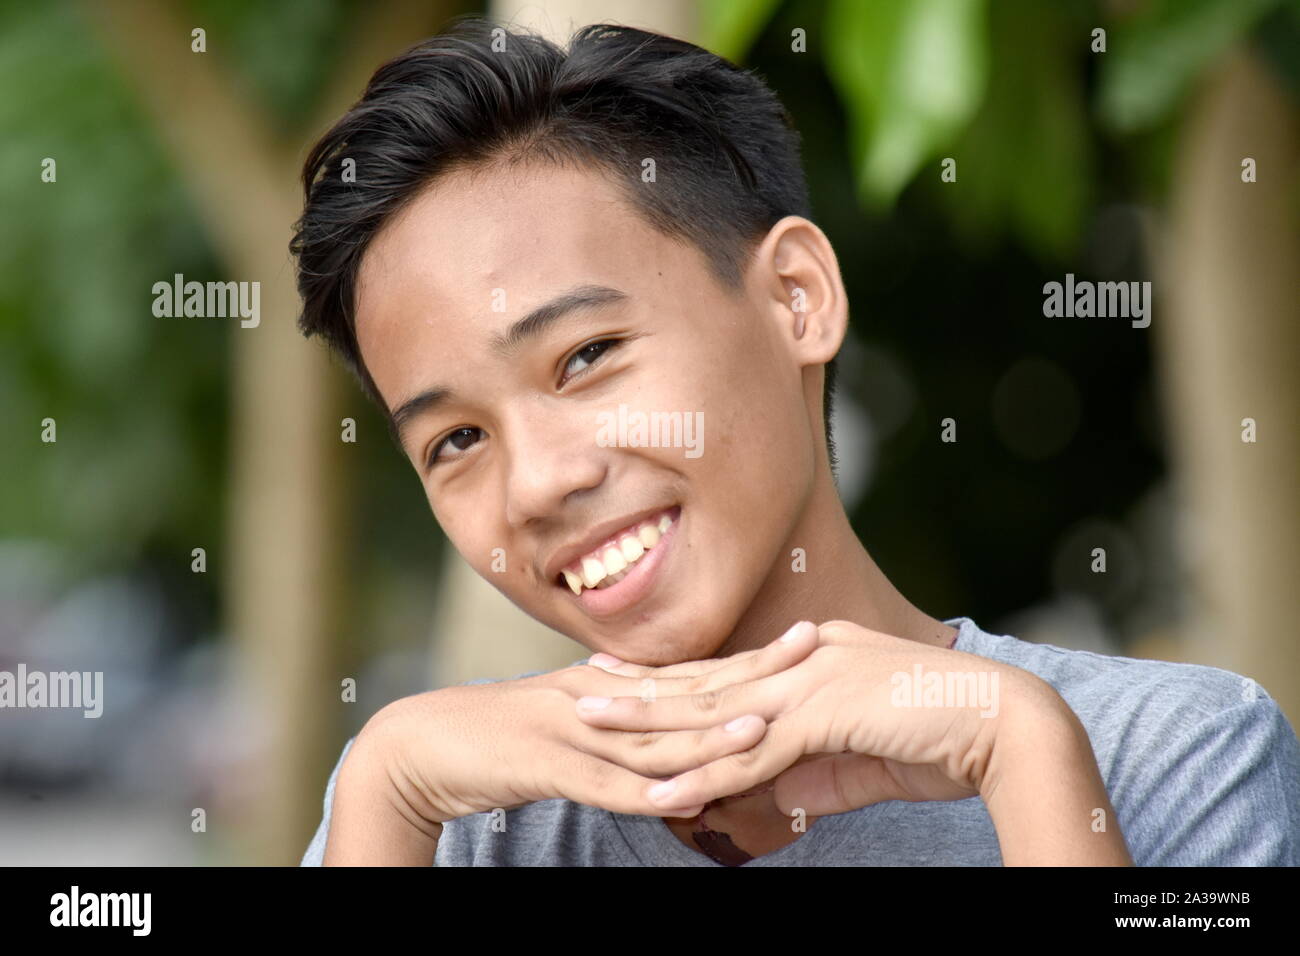 An An Attractive Male Youngster Stock Photo